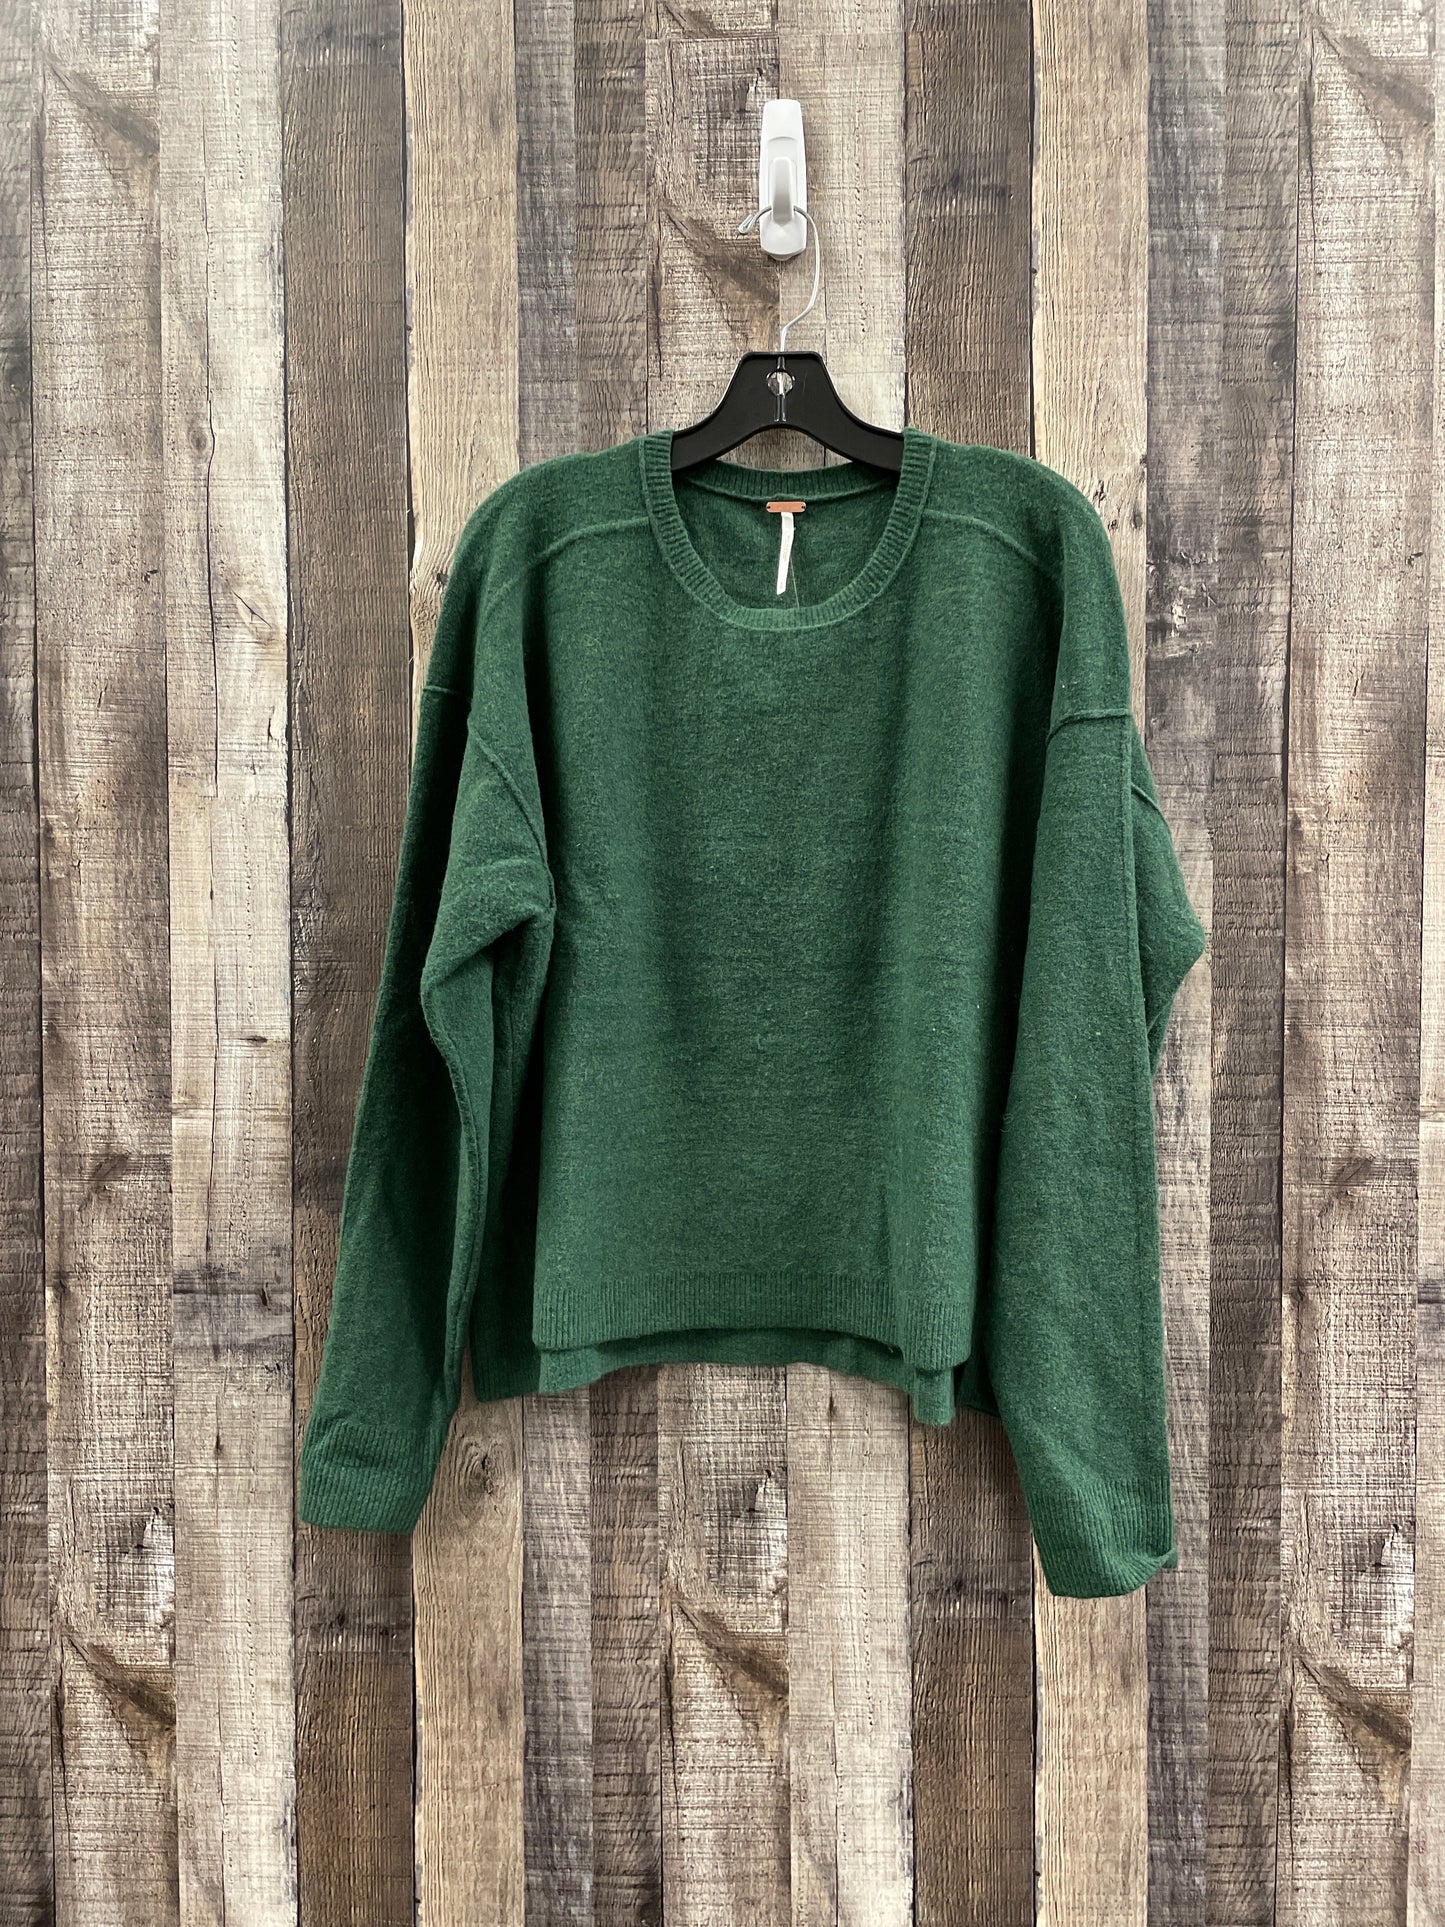 Green Sweater Free People, Size S